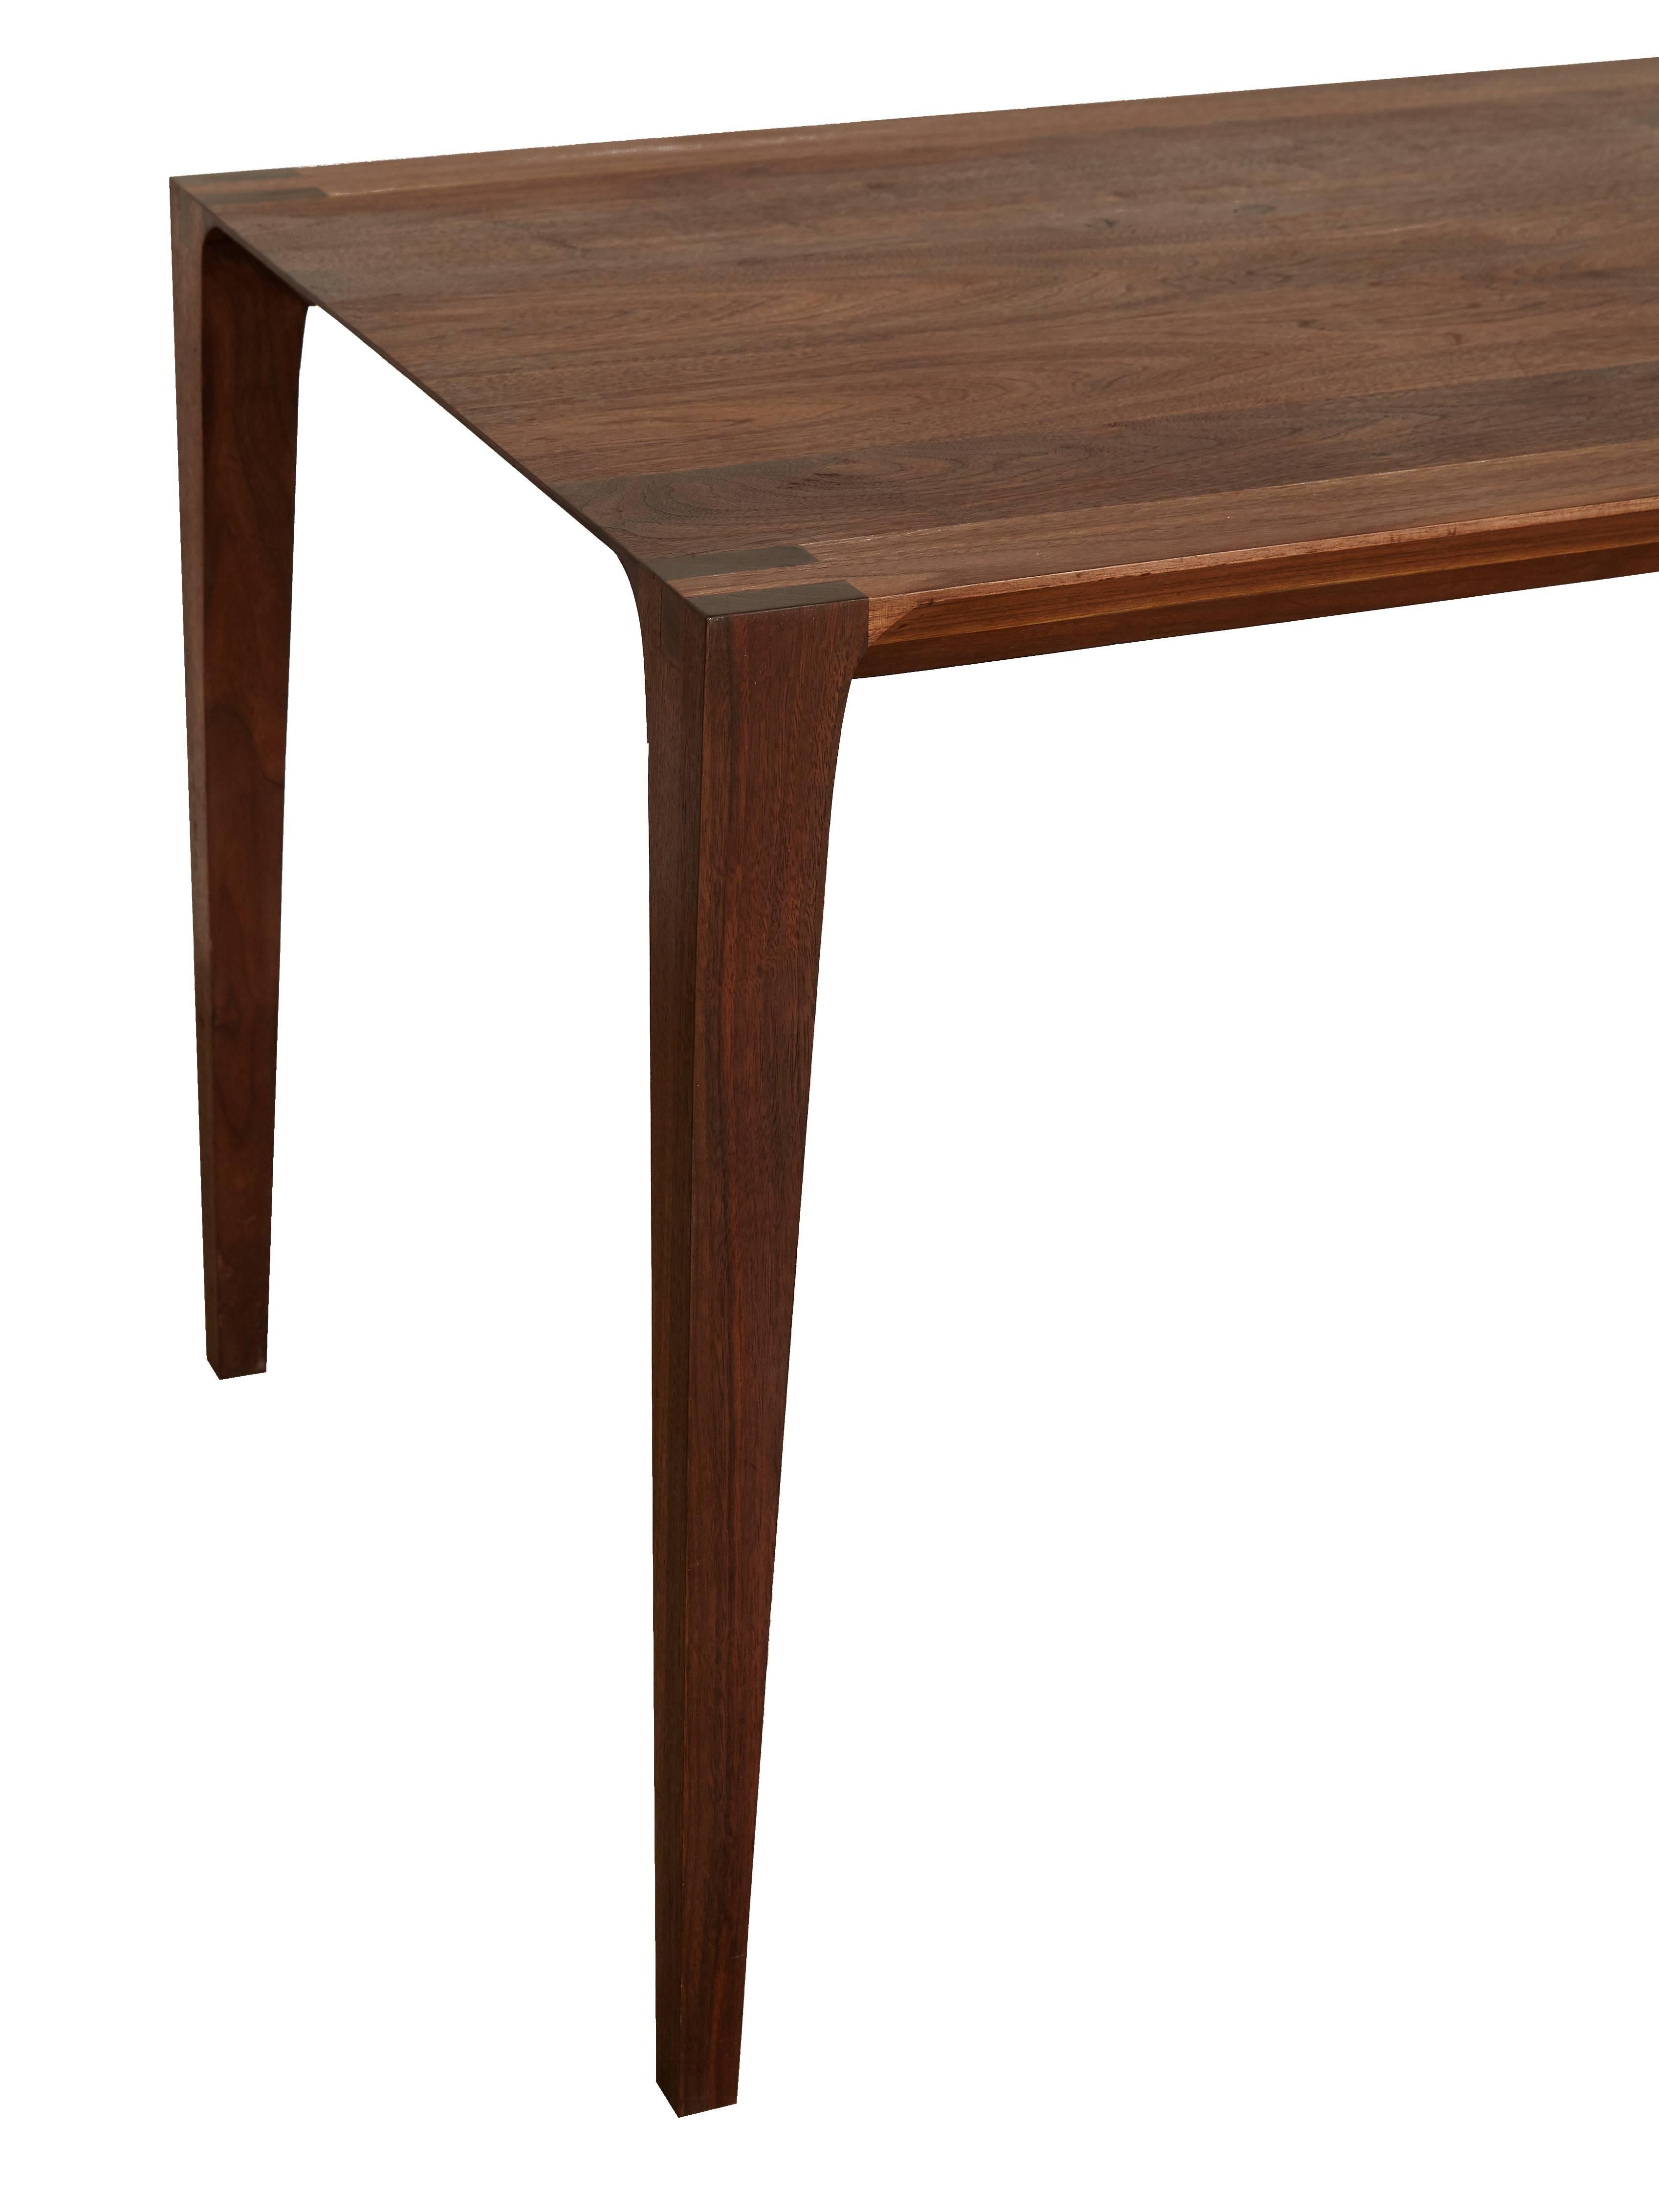 American Craftsman Solid Walnut Dining Table by Don Howell, circa 2017 For Sale